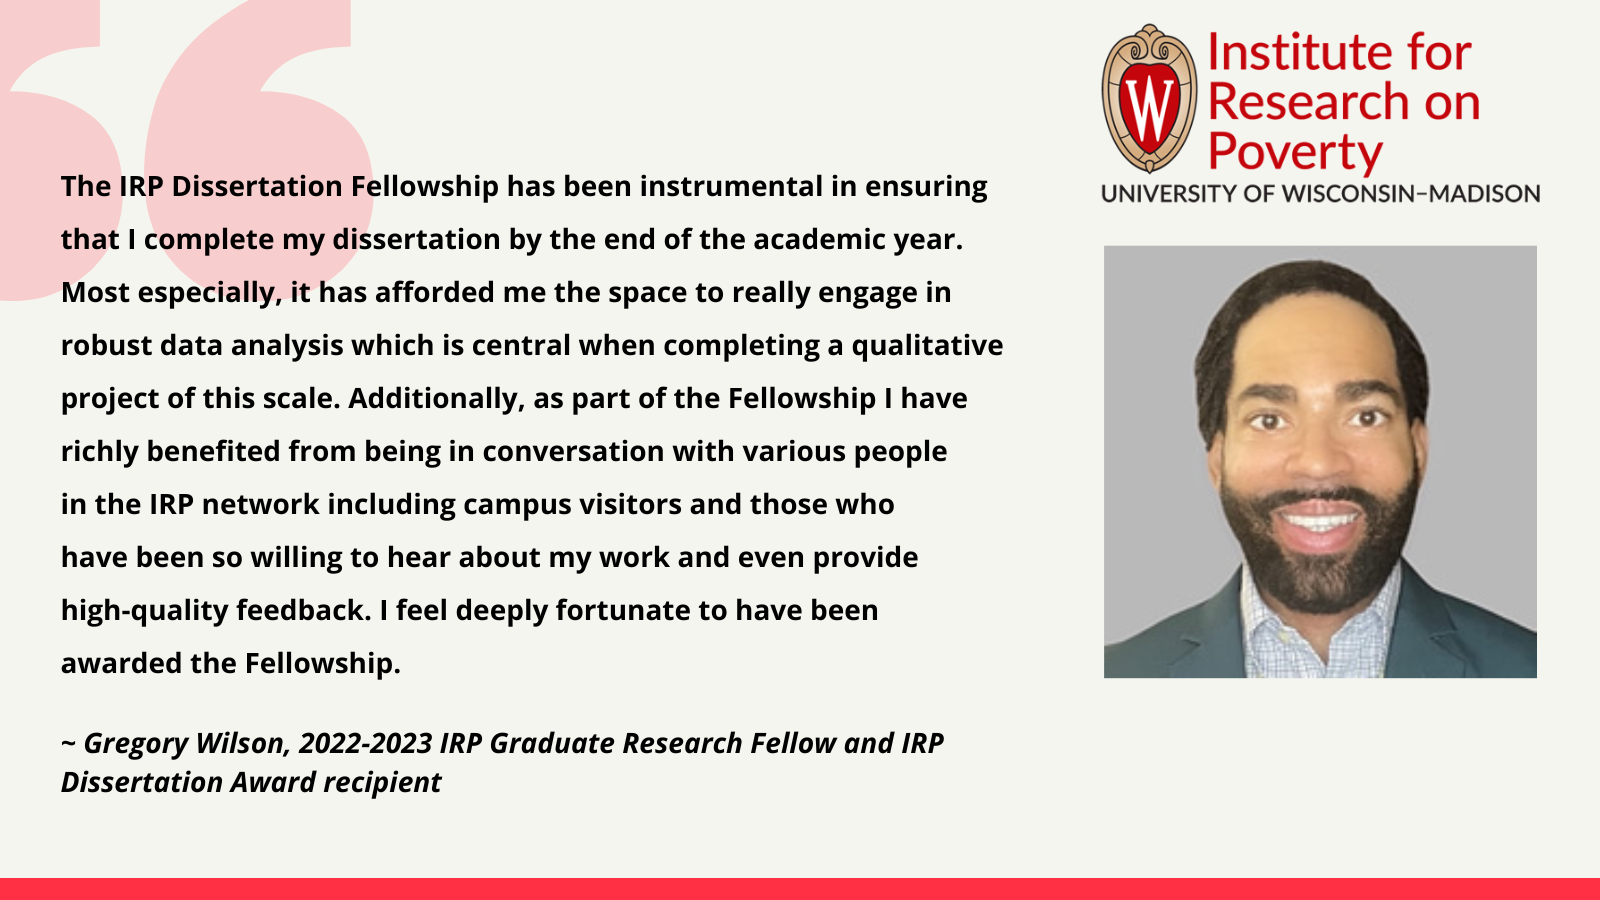 Greg Wilson, 2022-2023 IRP Graduate Research Fellow and IRP Dissertation Award recipient: The IRP Dissertation Fellowship has been instrumental in ensuring that I complete my dissertation by the end of the academic year. Most especially, it has afforded me the space to really engage in robust data analysis which is central when completing a qualitative project of this scale. Additionally, as part of the Fellowship I have richly benefited from being in conversation with various people in the IRP network including campus visitors and those who have been so willing to hear about my work and even provide high-quality feedback. I feel deeply fortunate to have been awarded the Fellowship.